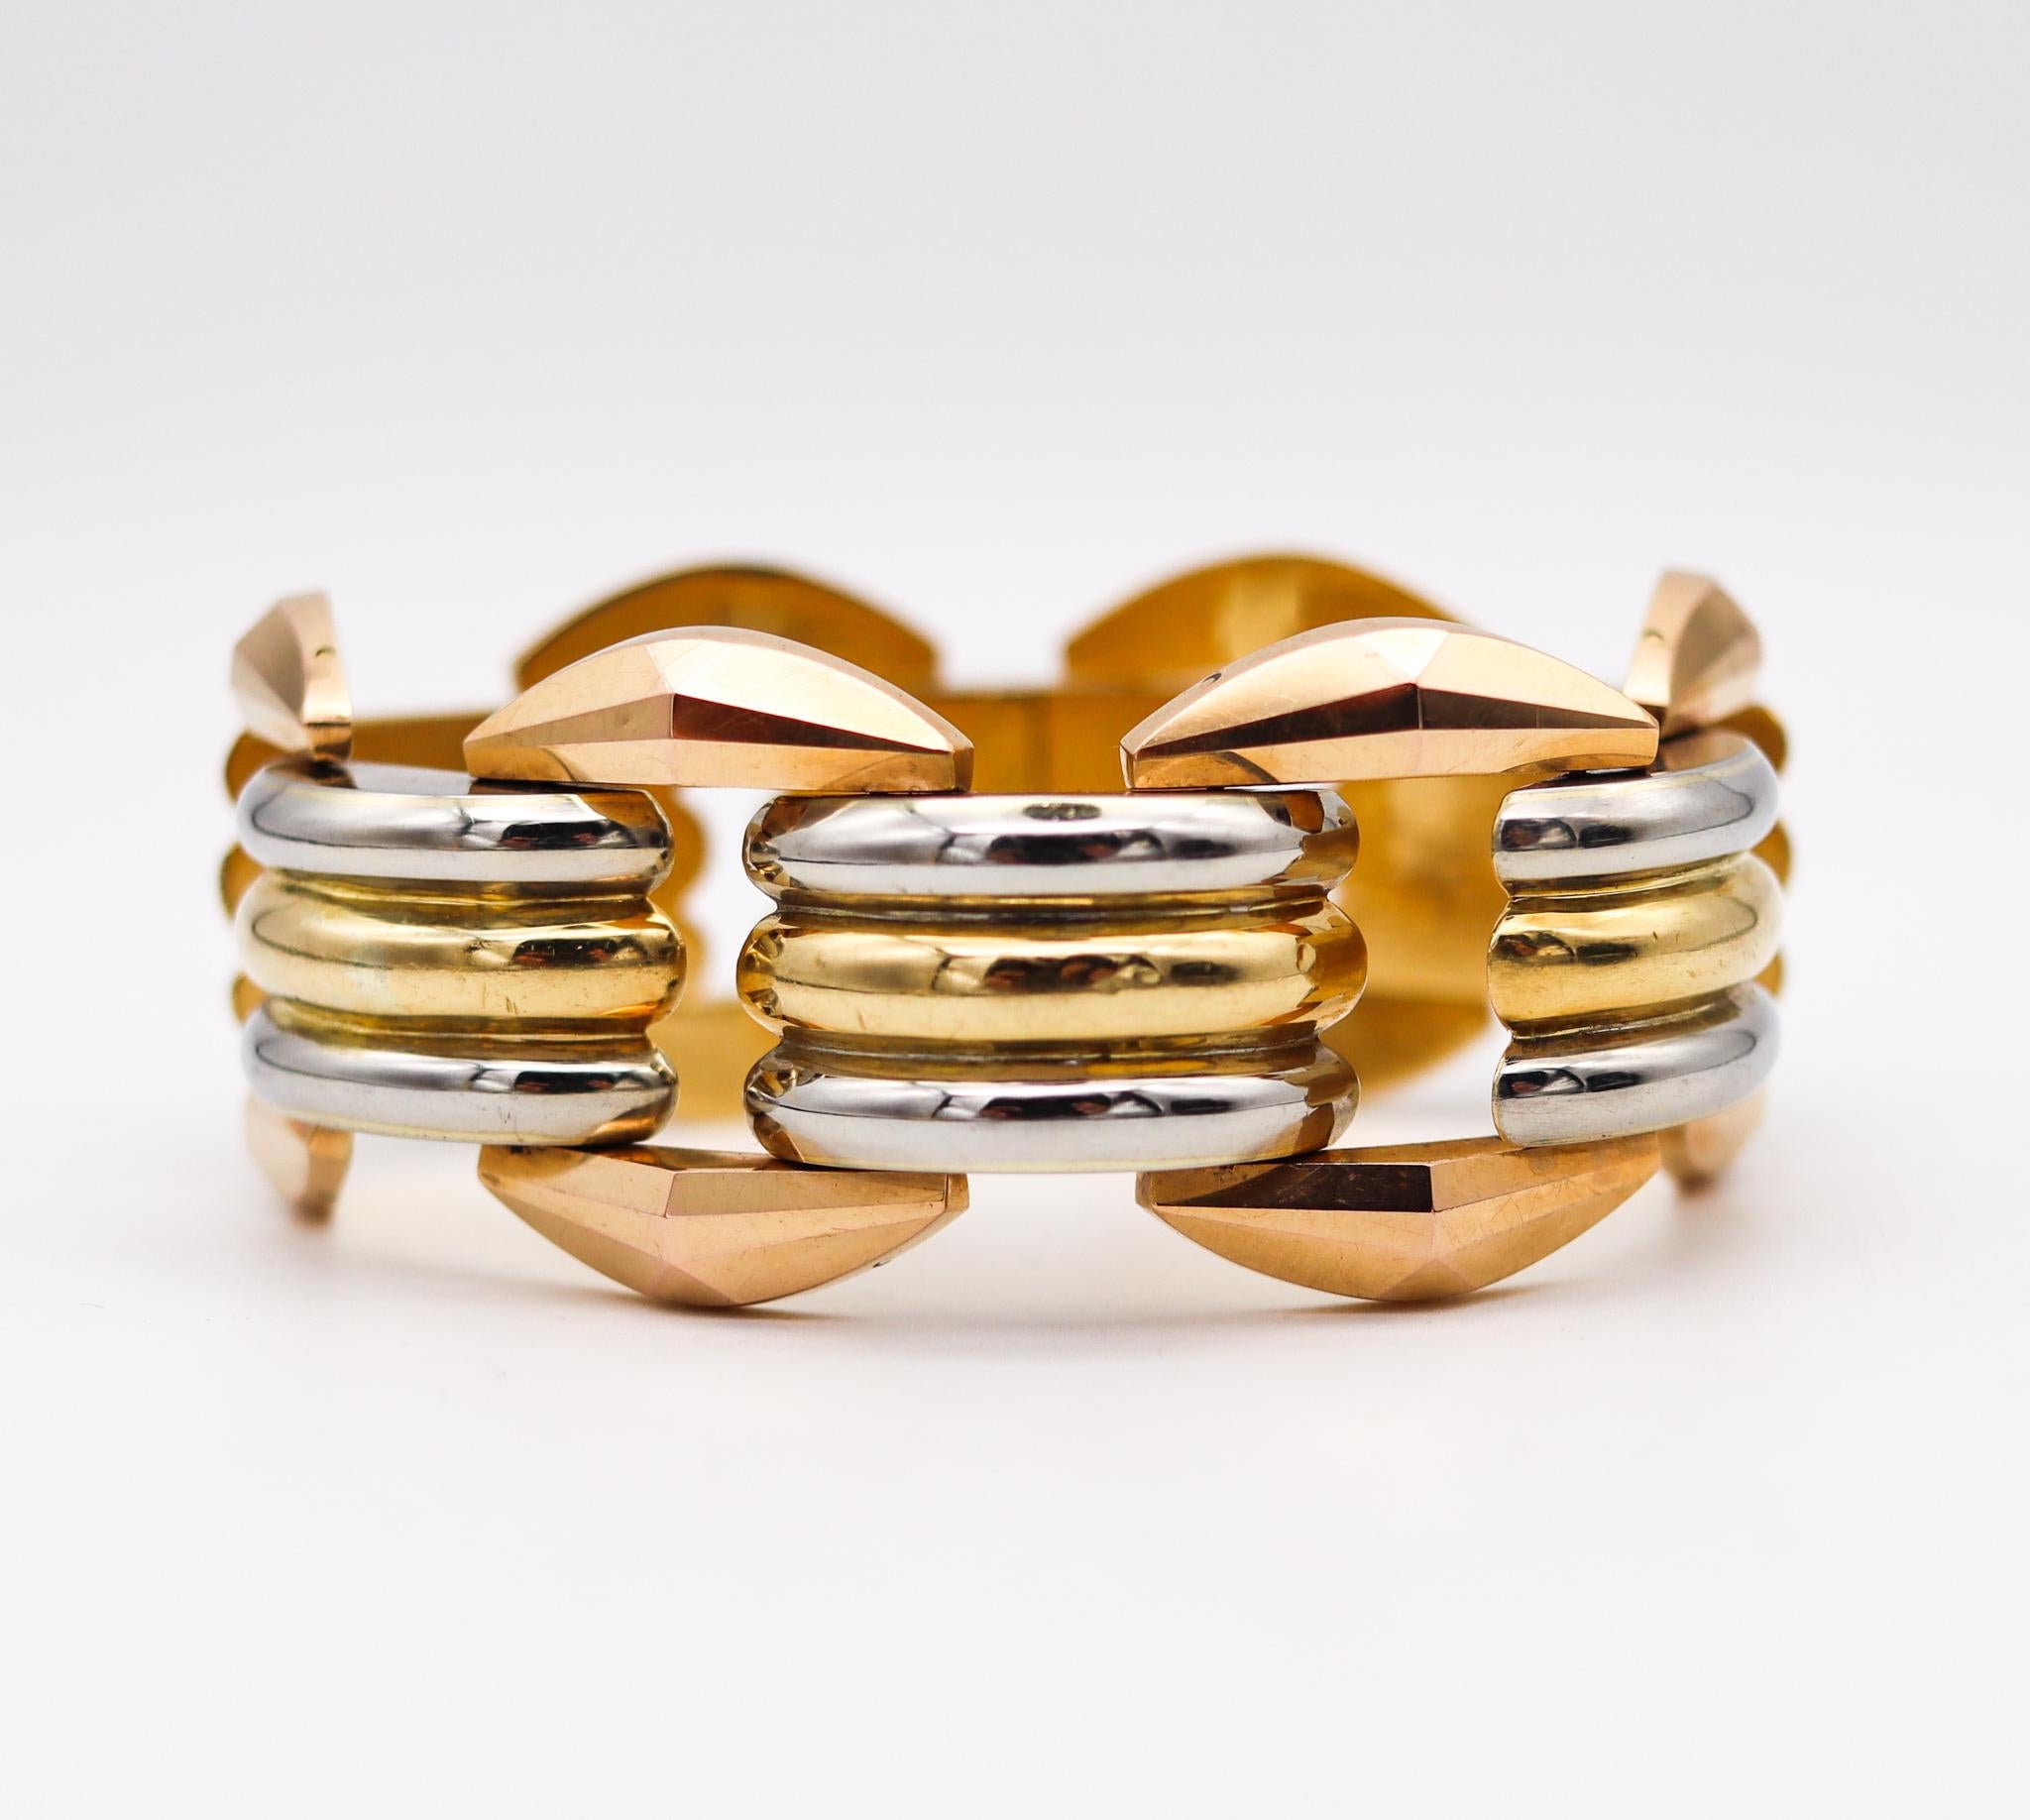 Italian art deco faceted tank bracelet.

Beautiful bold piece, created in Milano Italy during the transition of the art deco and retro periods, back in the 1935. This tank bracelet has been crafted with faceted patterns in solid 18 karats gold of